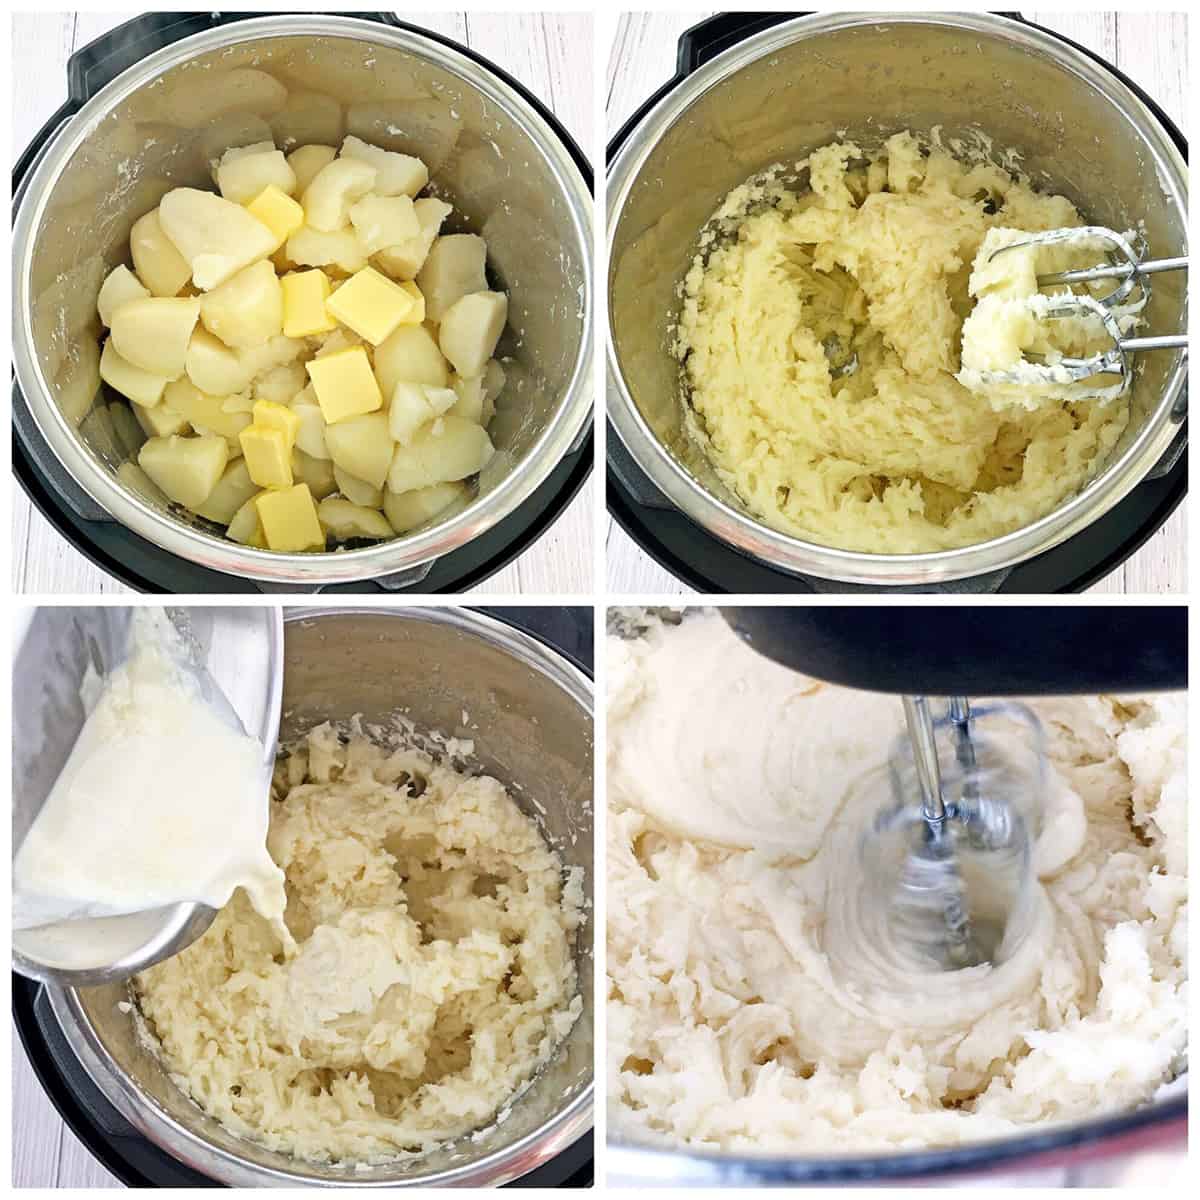 Is there anything more comforting food than Instant Pot Creamy Mashed Potatoes Recipe? It never gets old at our house as well. I really wanted to post this quick version of it before Thanksgiving to save you time in the upcoming holiday cooking!